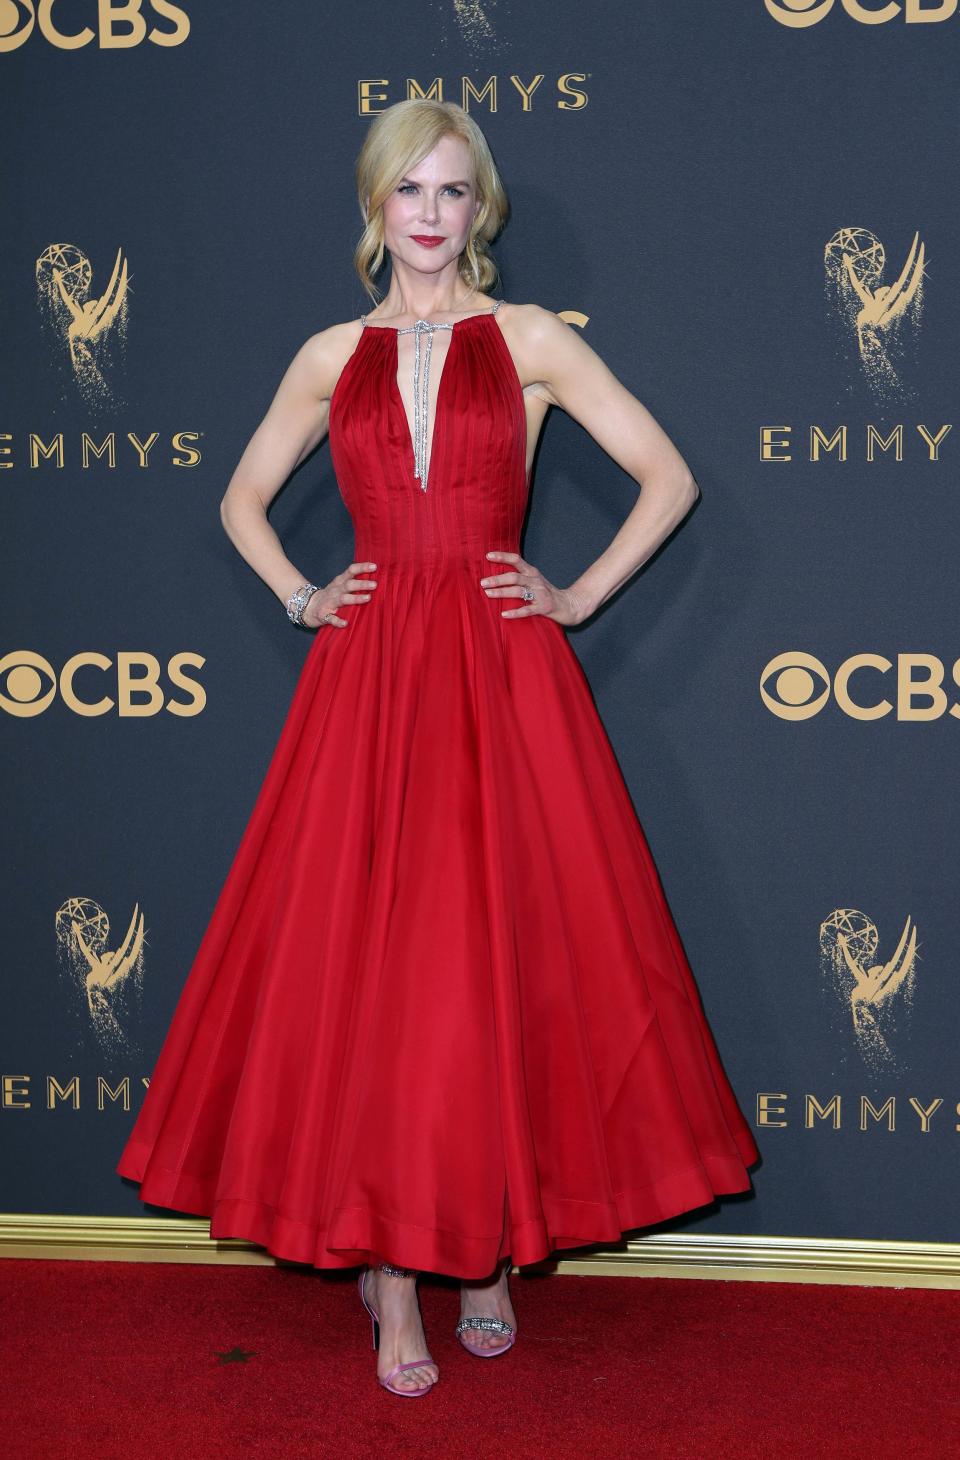 <p>Nicole Kidman, nominated for Best Actress in a Limited Series for her role in <em>Big Little Lies</em>, wore red to walk the red carpet. Her tea-length Calvin Klein dress featured a deep V-neck, which highlighted the large diamonds hanging from her neck. (Photo: Reuters) </p>